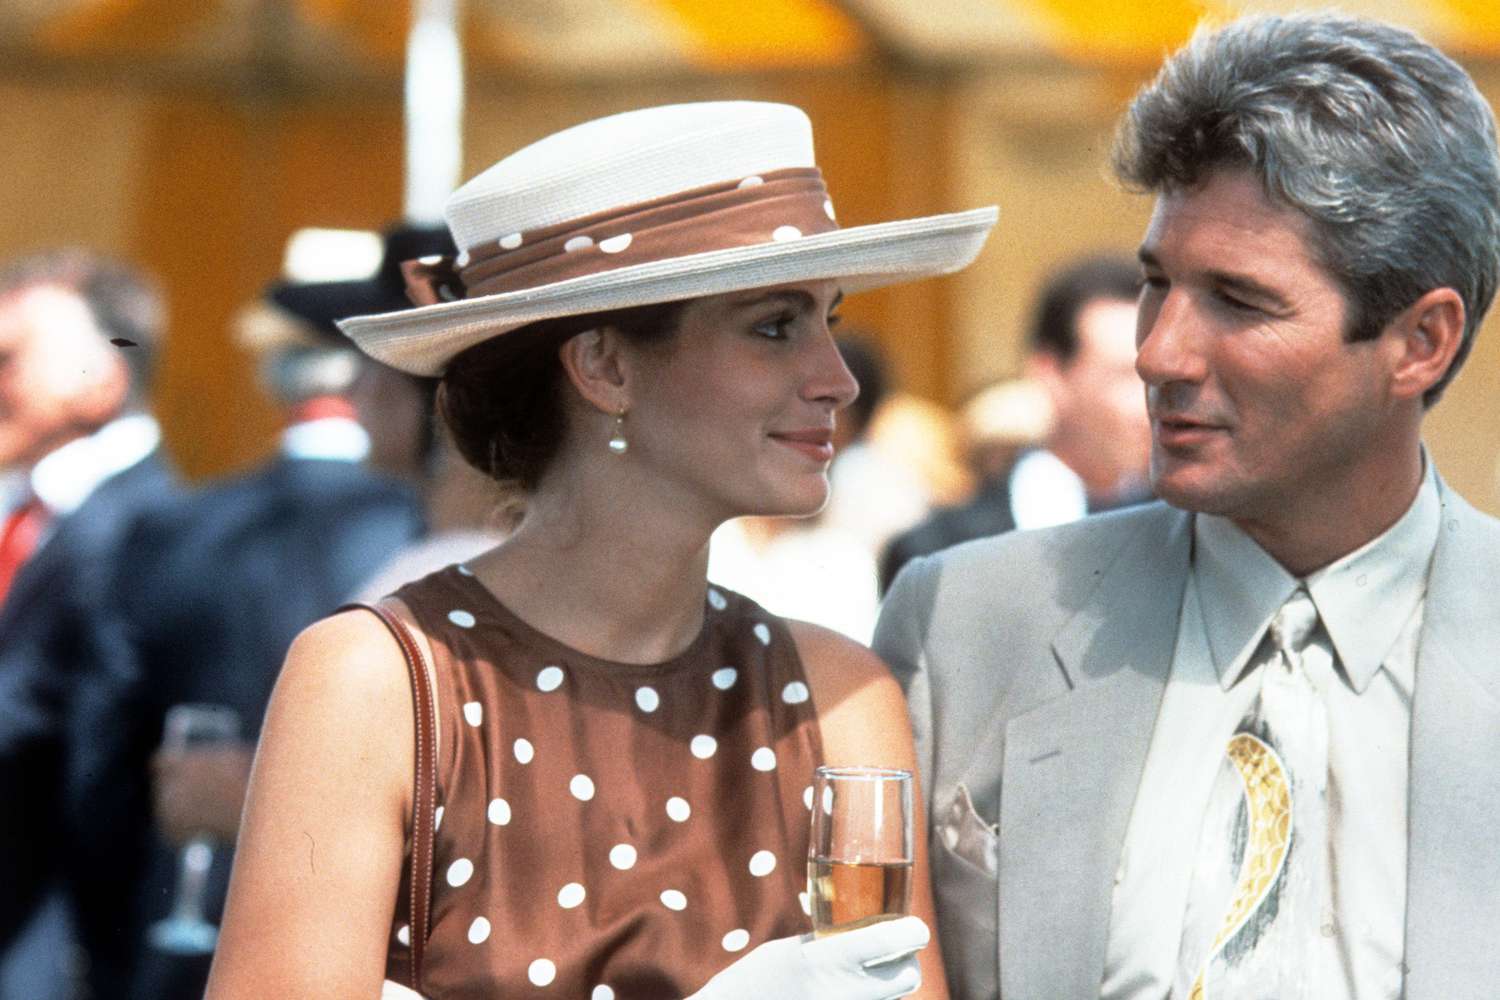 Julia Roberts and Richard Gere in a scene from the film Pretty Woman 1990